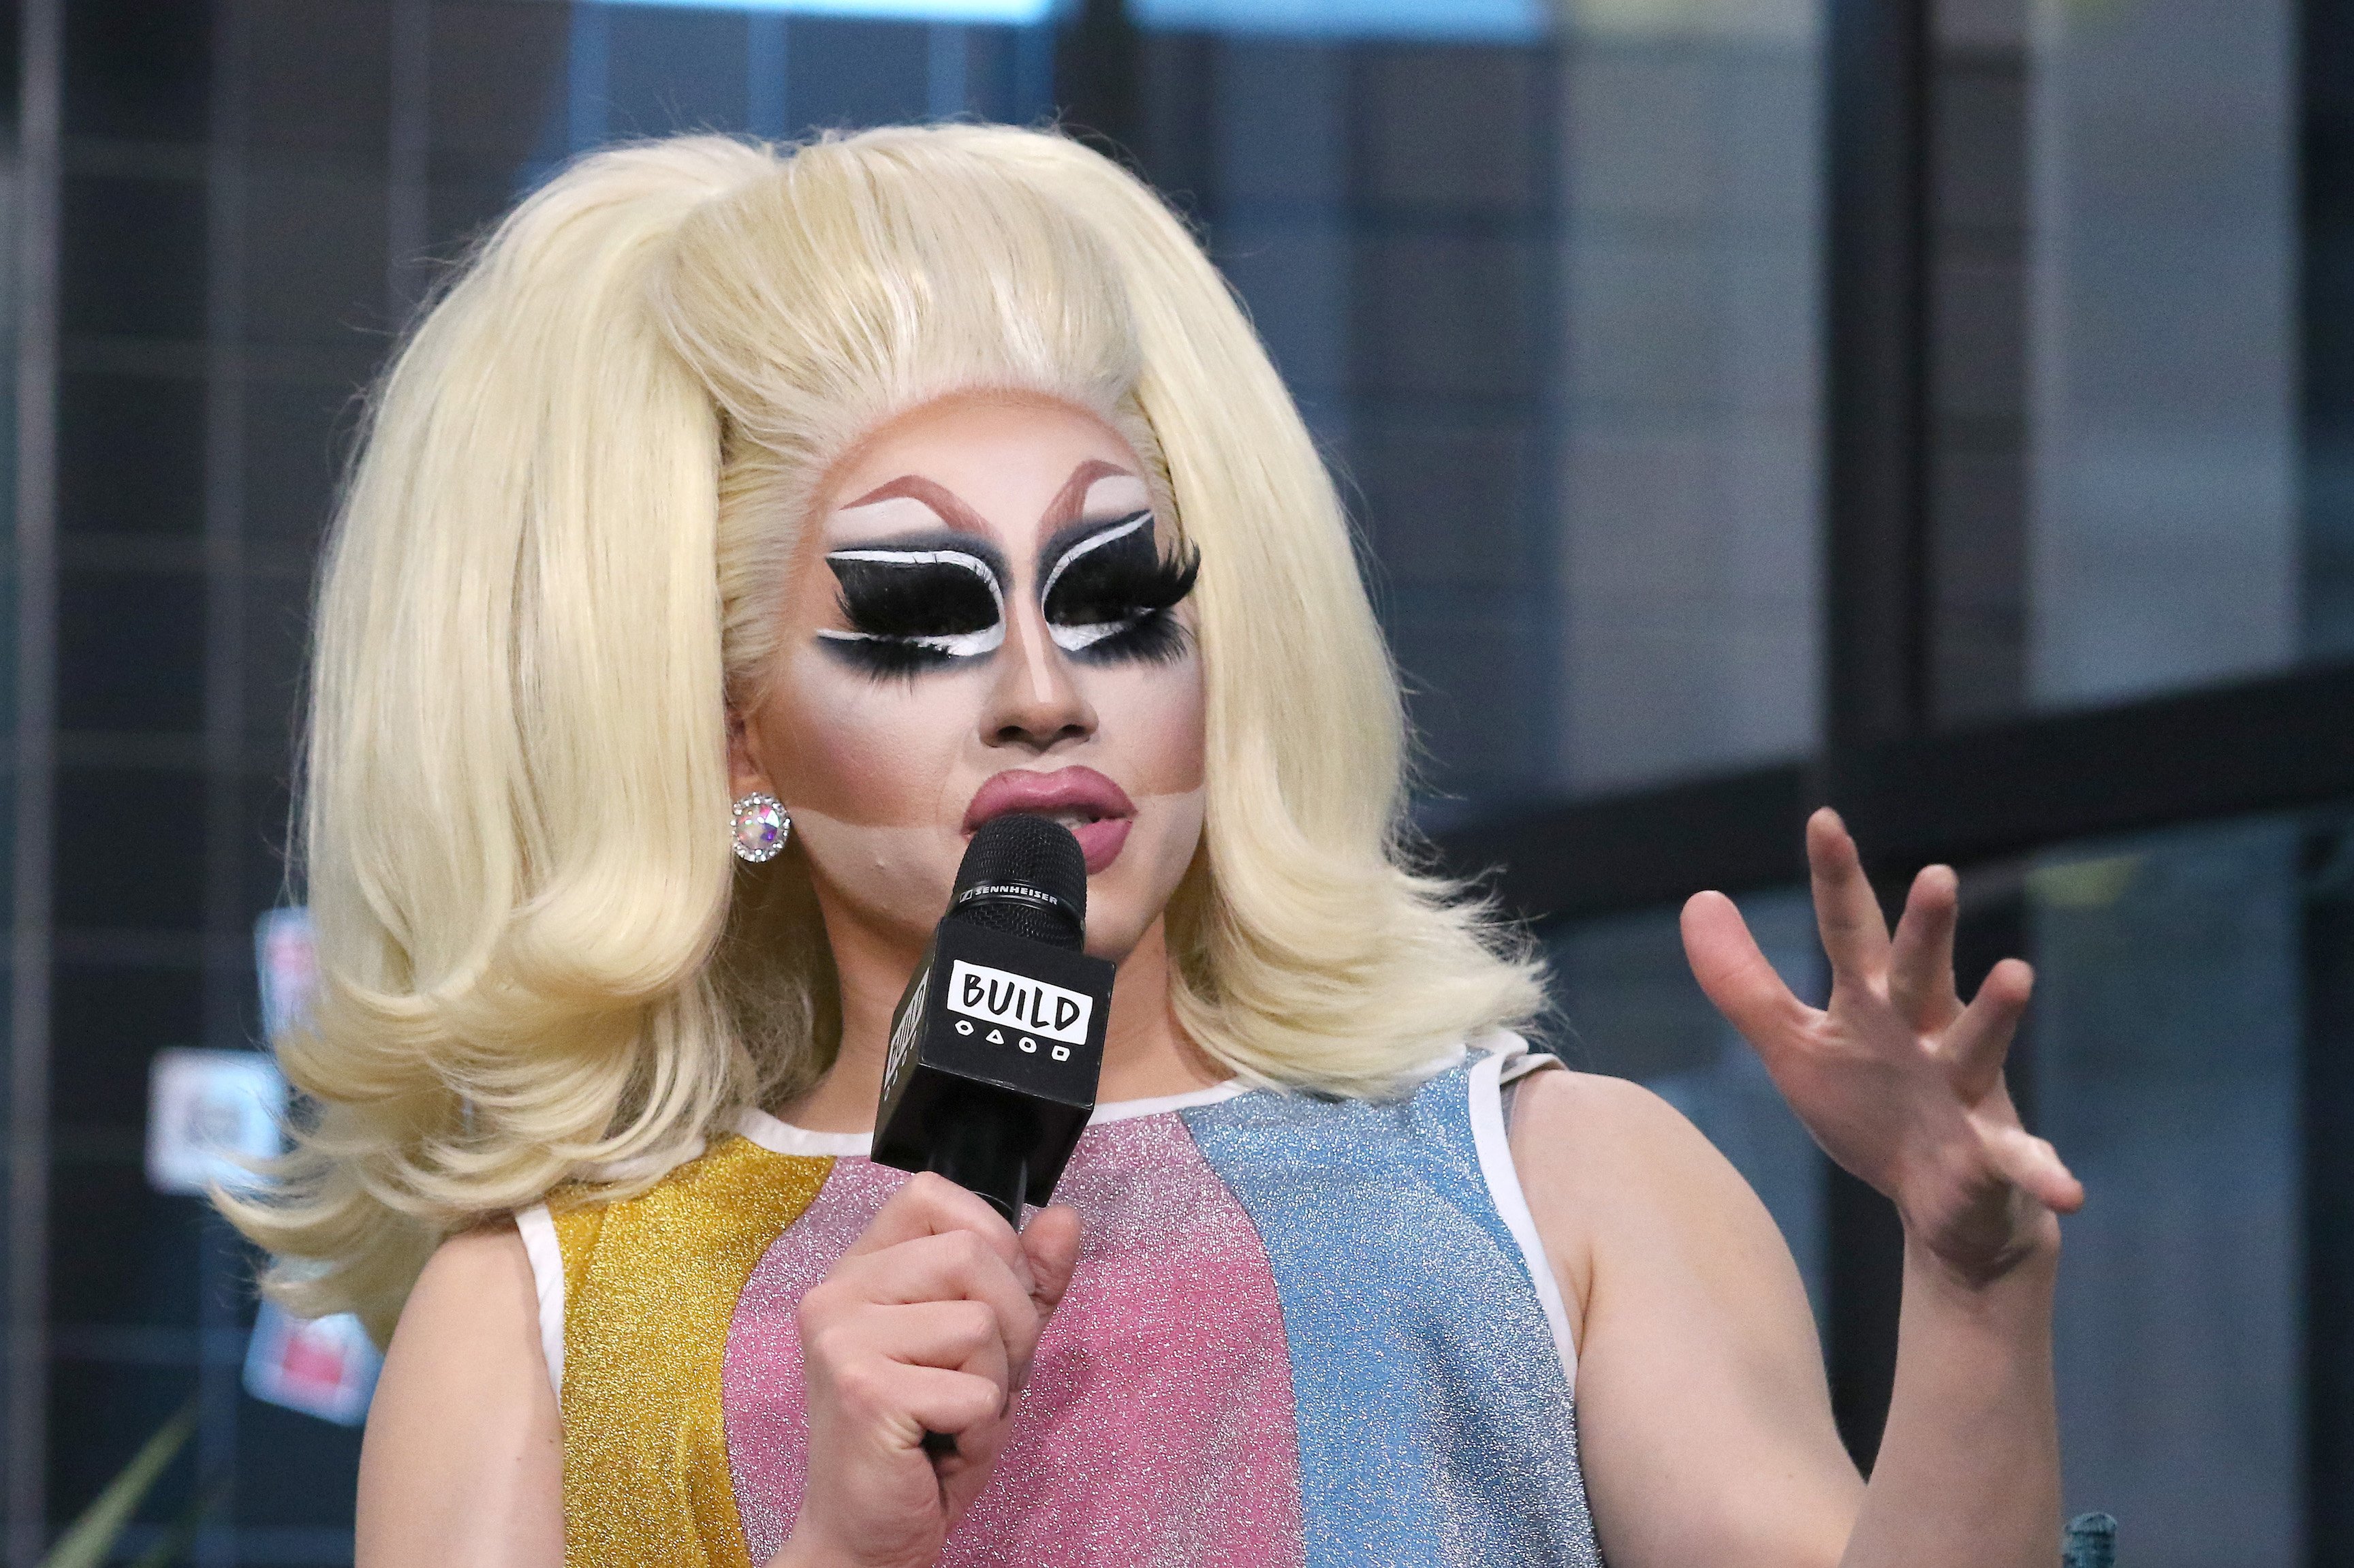 RuPauls Drag Race: After Trixie Mattel, Which Star Has the Highest Net Worth?